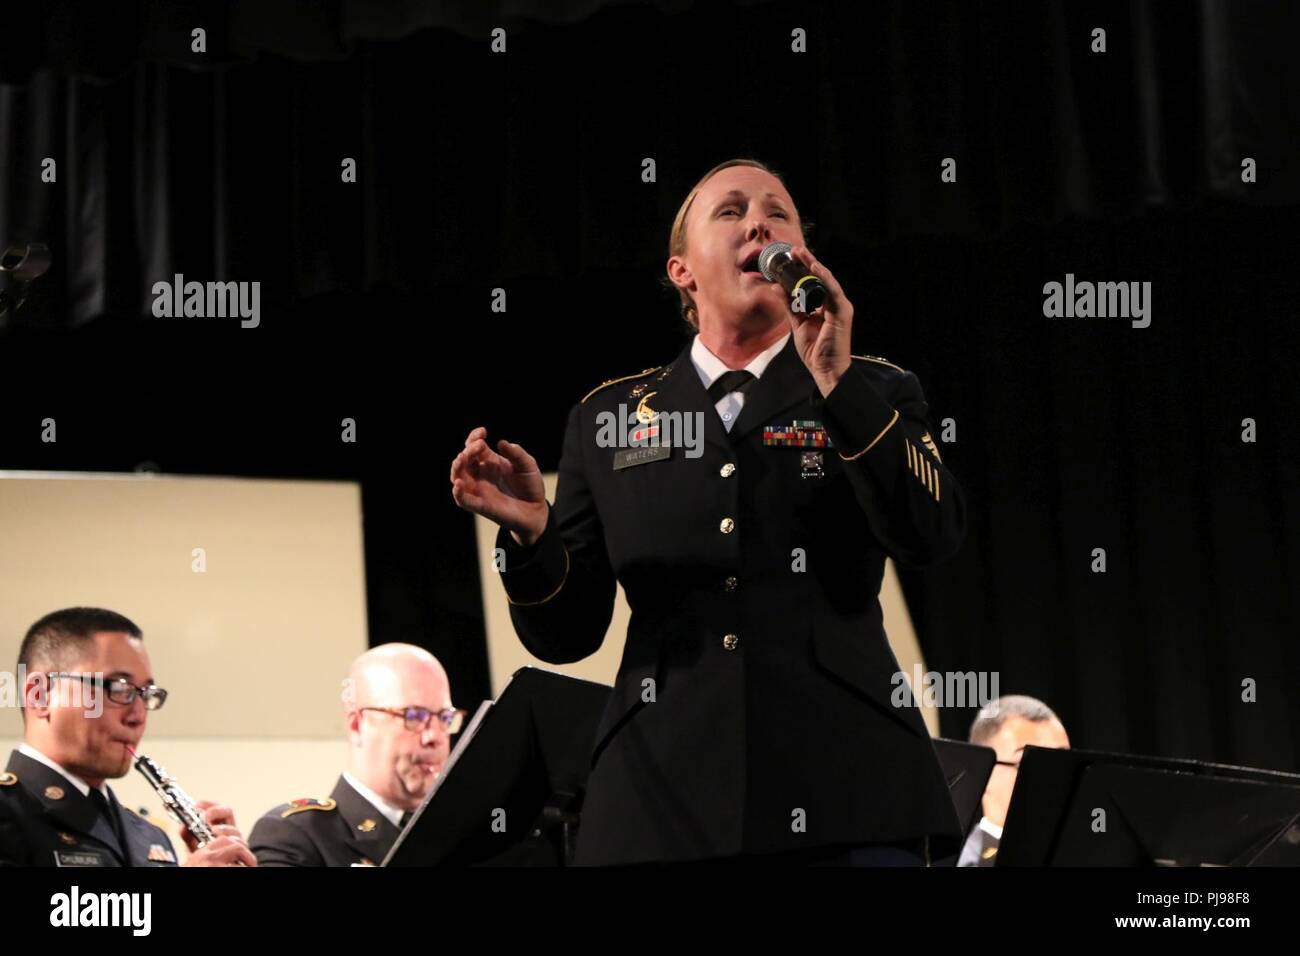 Staff Sgt. Krysta Waters of the 111th Army Band sings passionately in her performance during the joint concert of the 111th Army Band and the 234th Army Band at Astoria High School in Astoria, Oregon, July 7, 2018.  The concert is the second collaboration between the 111th Army Band and the 234th Army Band with efforts to display the results of their training in a live setting. Stock Photo